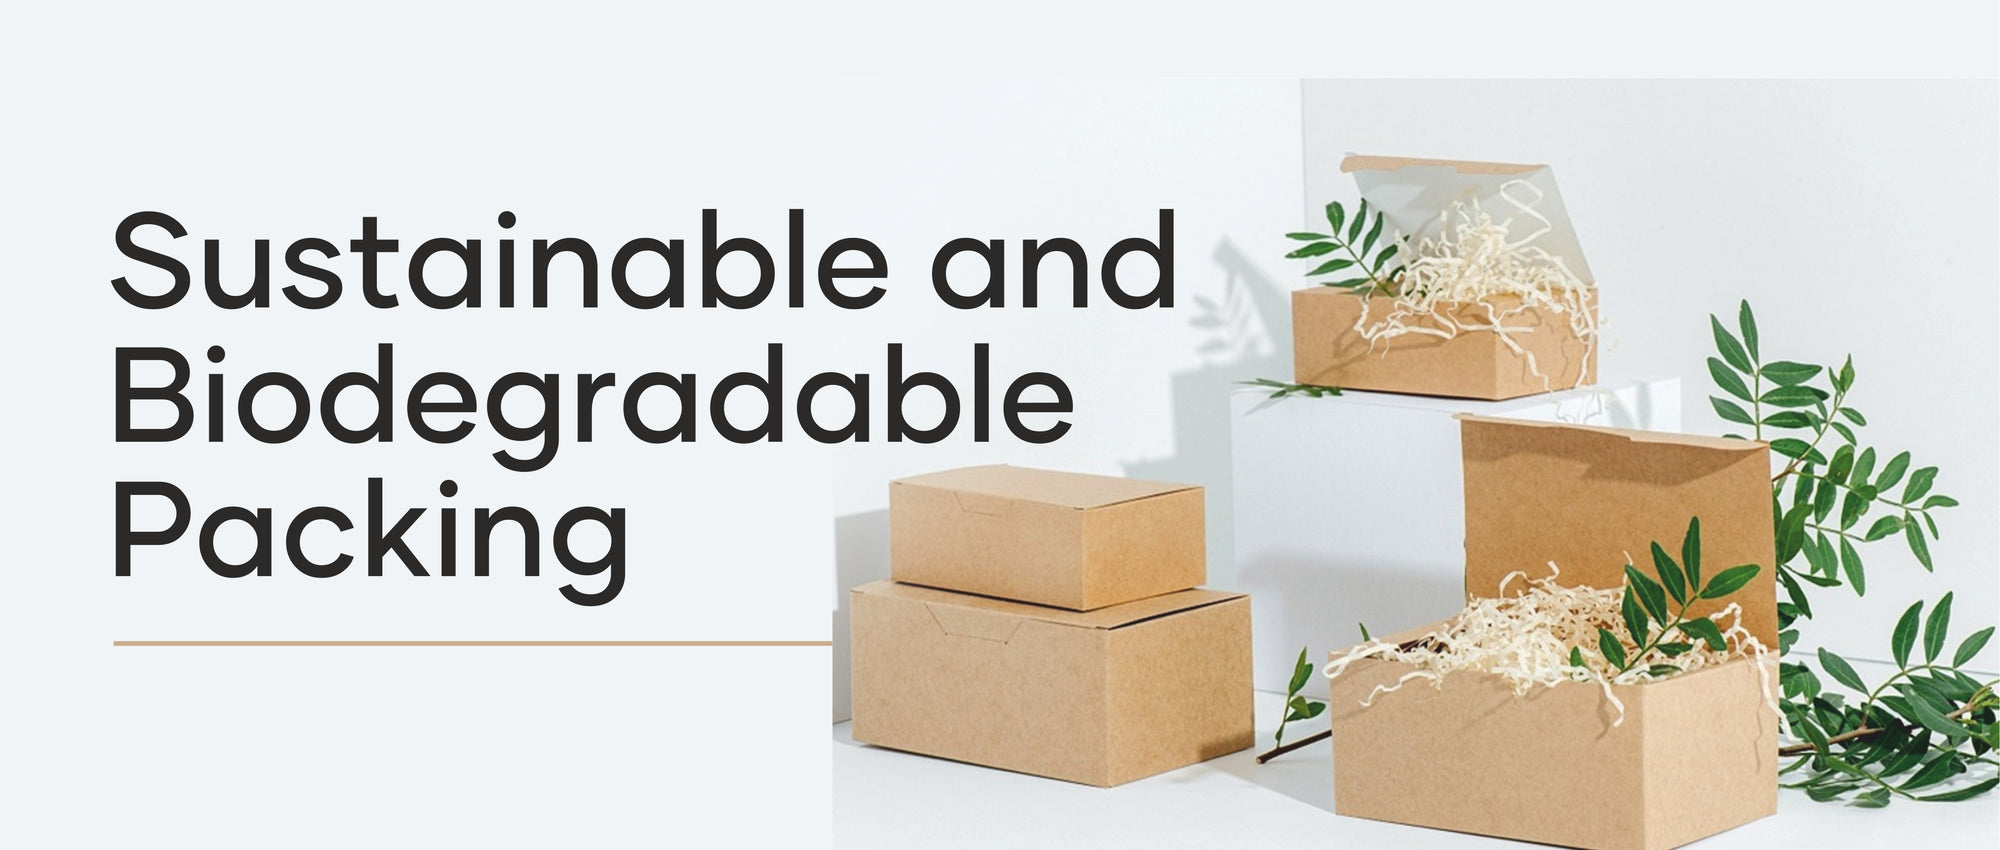 SUSTAINABLE AND BIODEGRADABLE PACKAGING: A GREEN CHOICE FOR NATURAL ORGANIC COSMETICS